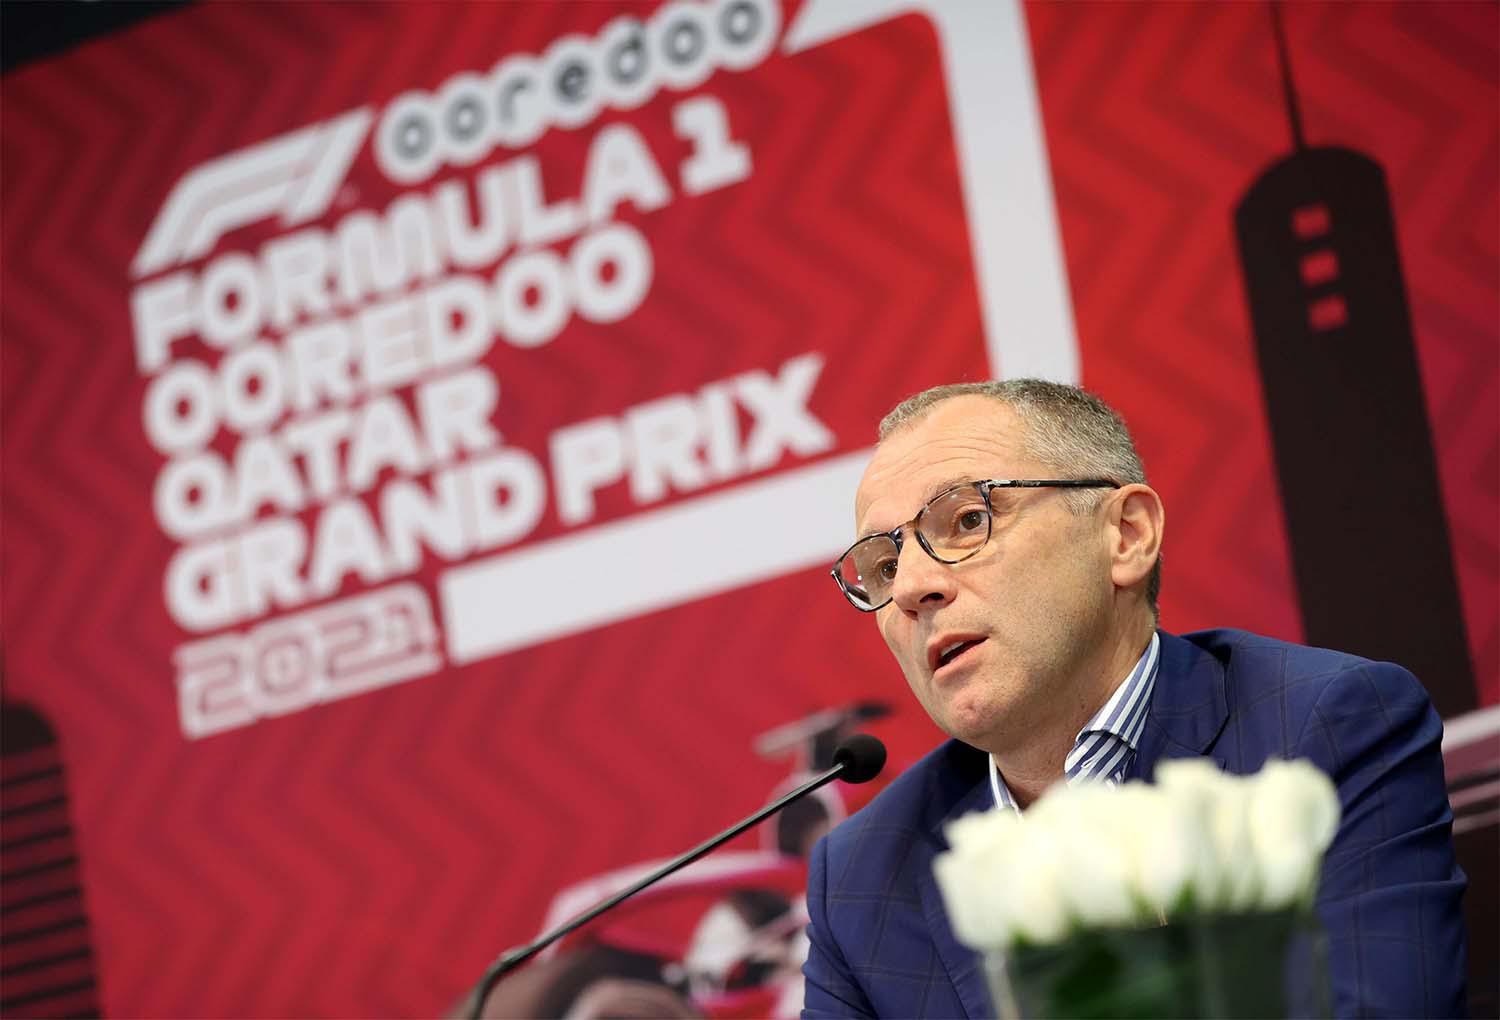 CEO of the Formula One Group, Stefano Domenicali